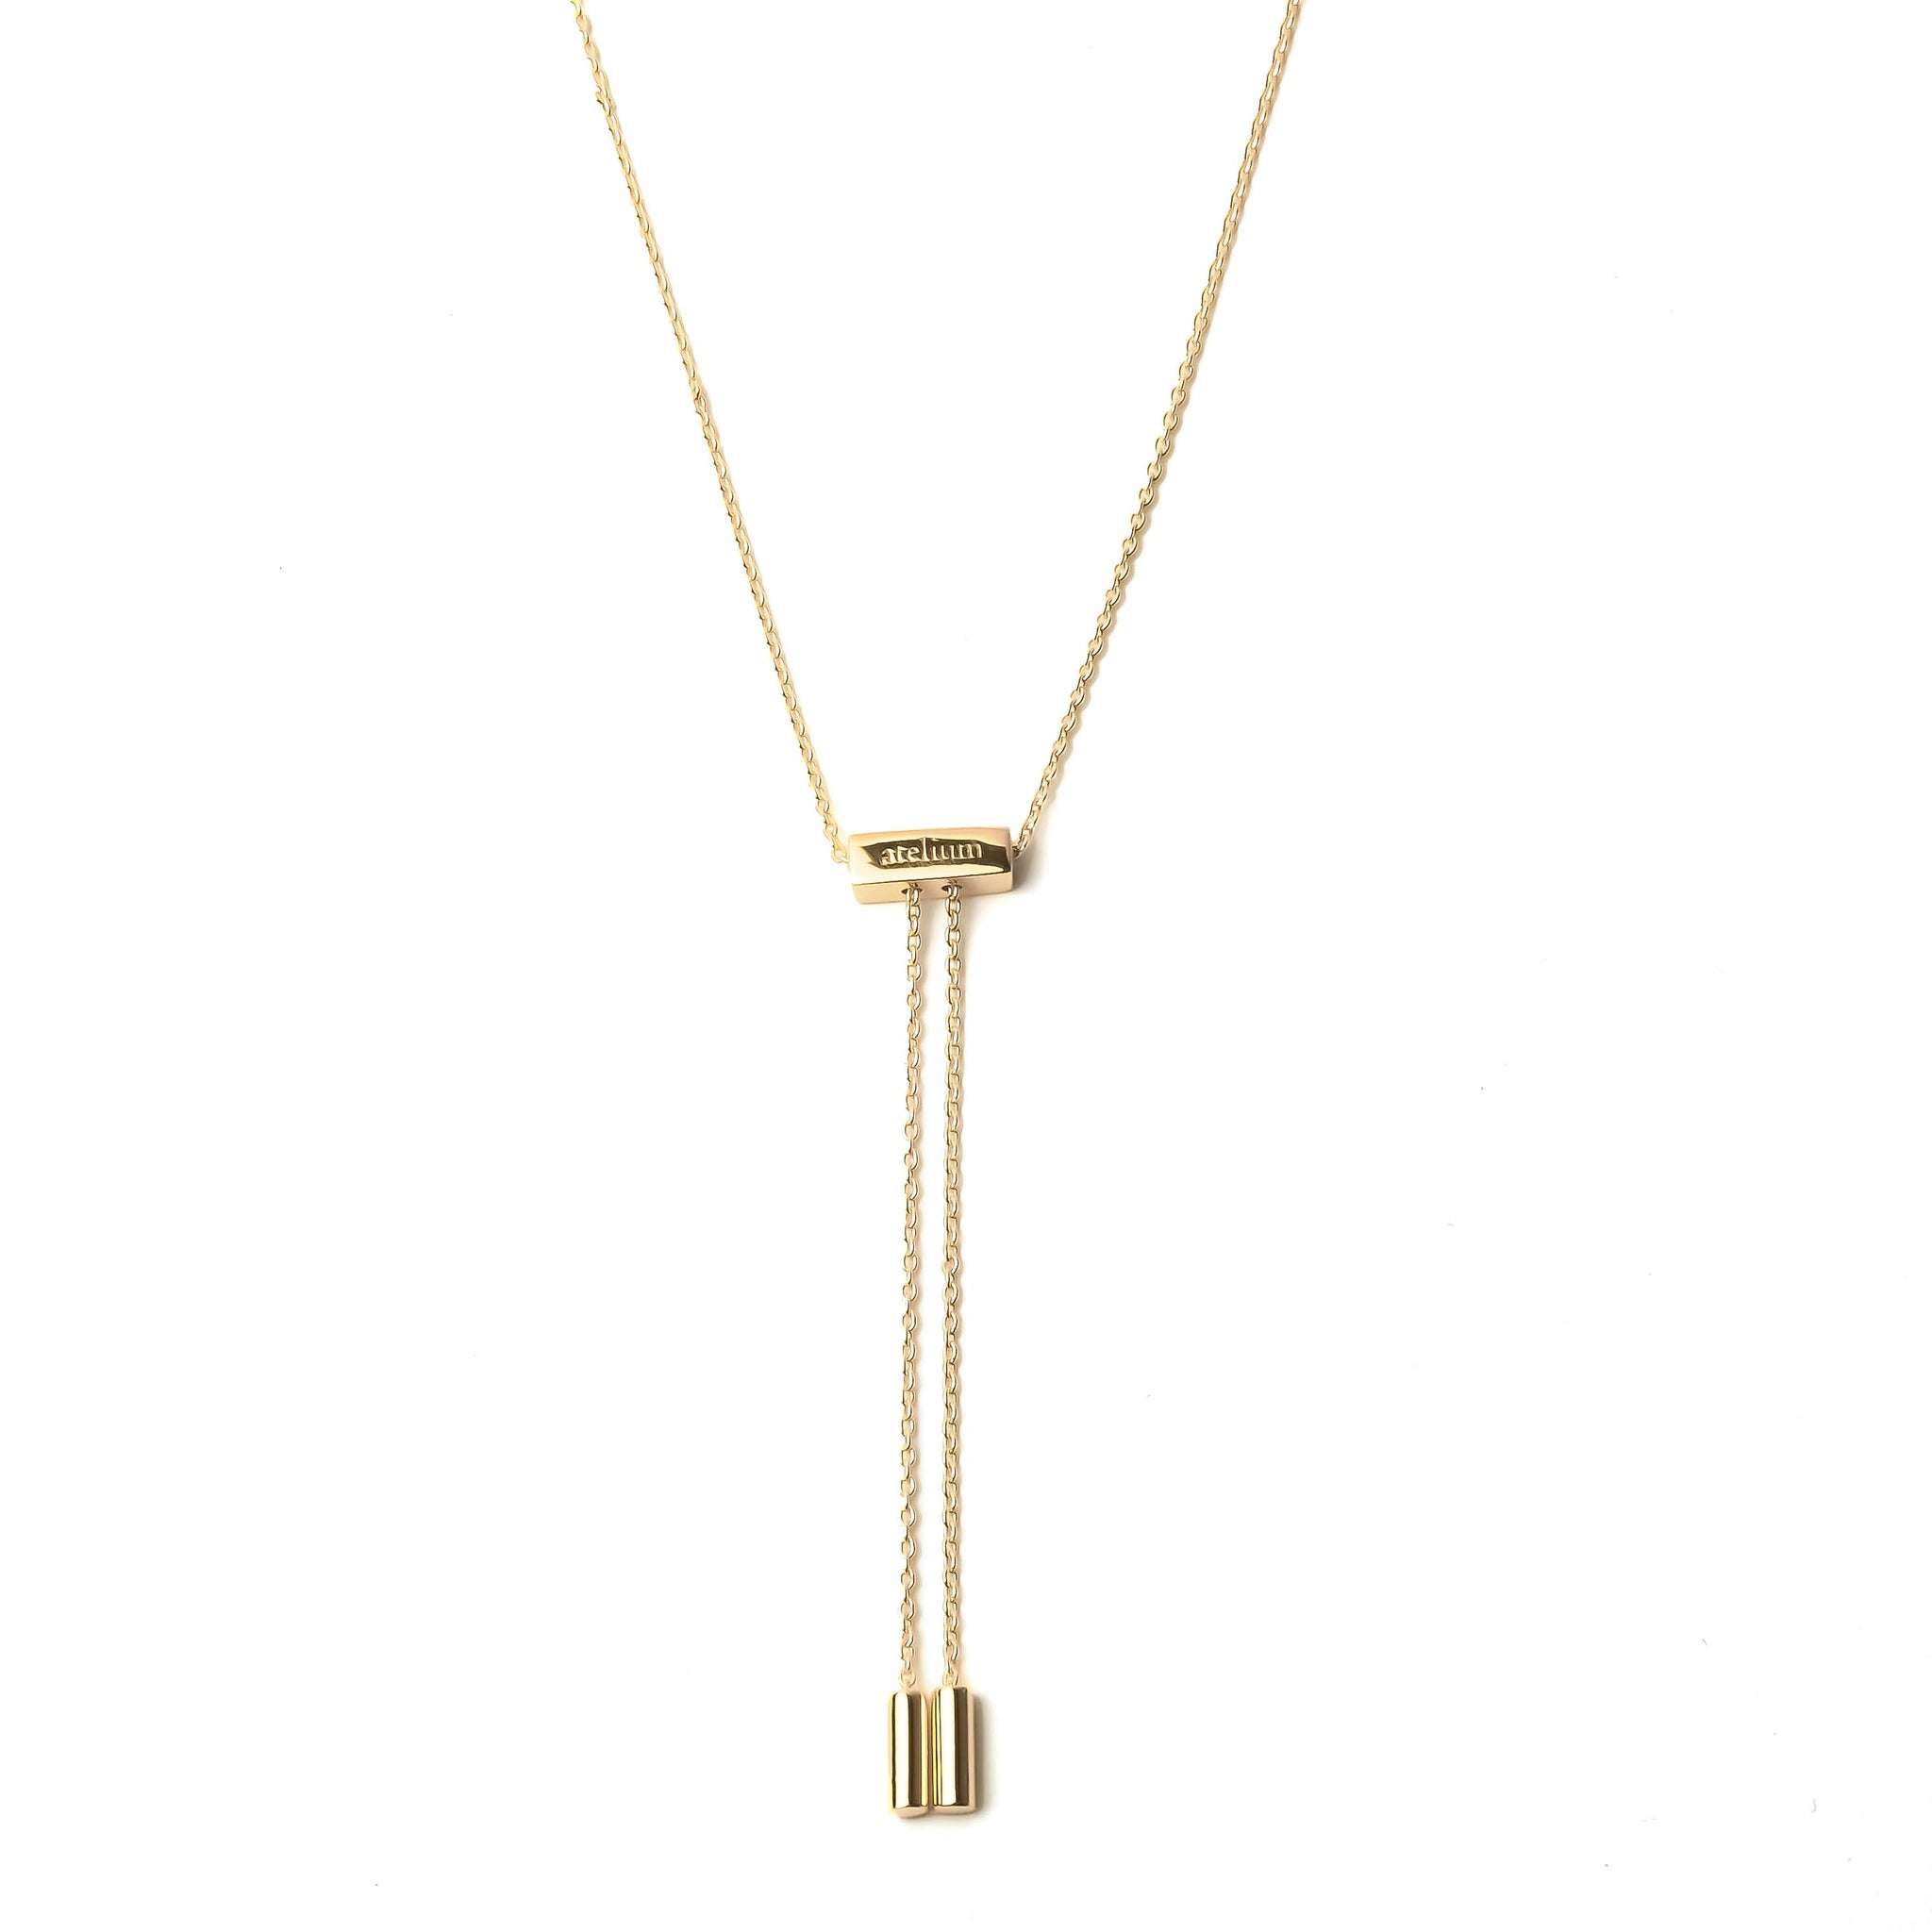 Thin gold chain linked necklace with a pull bar adjustable closure